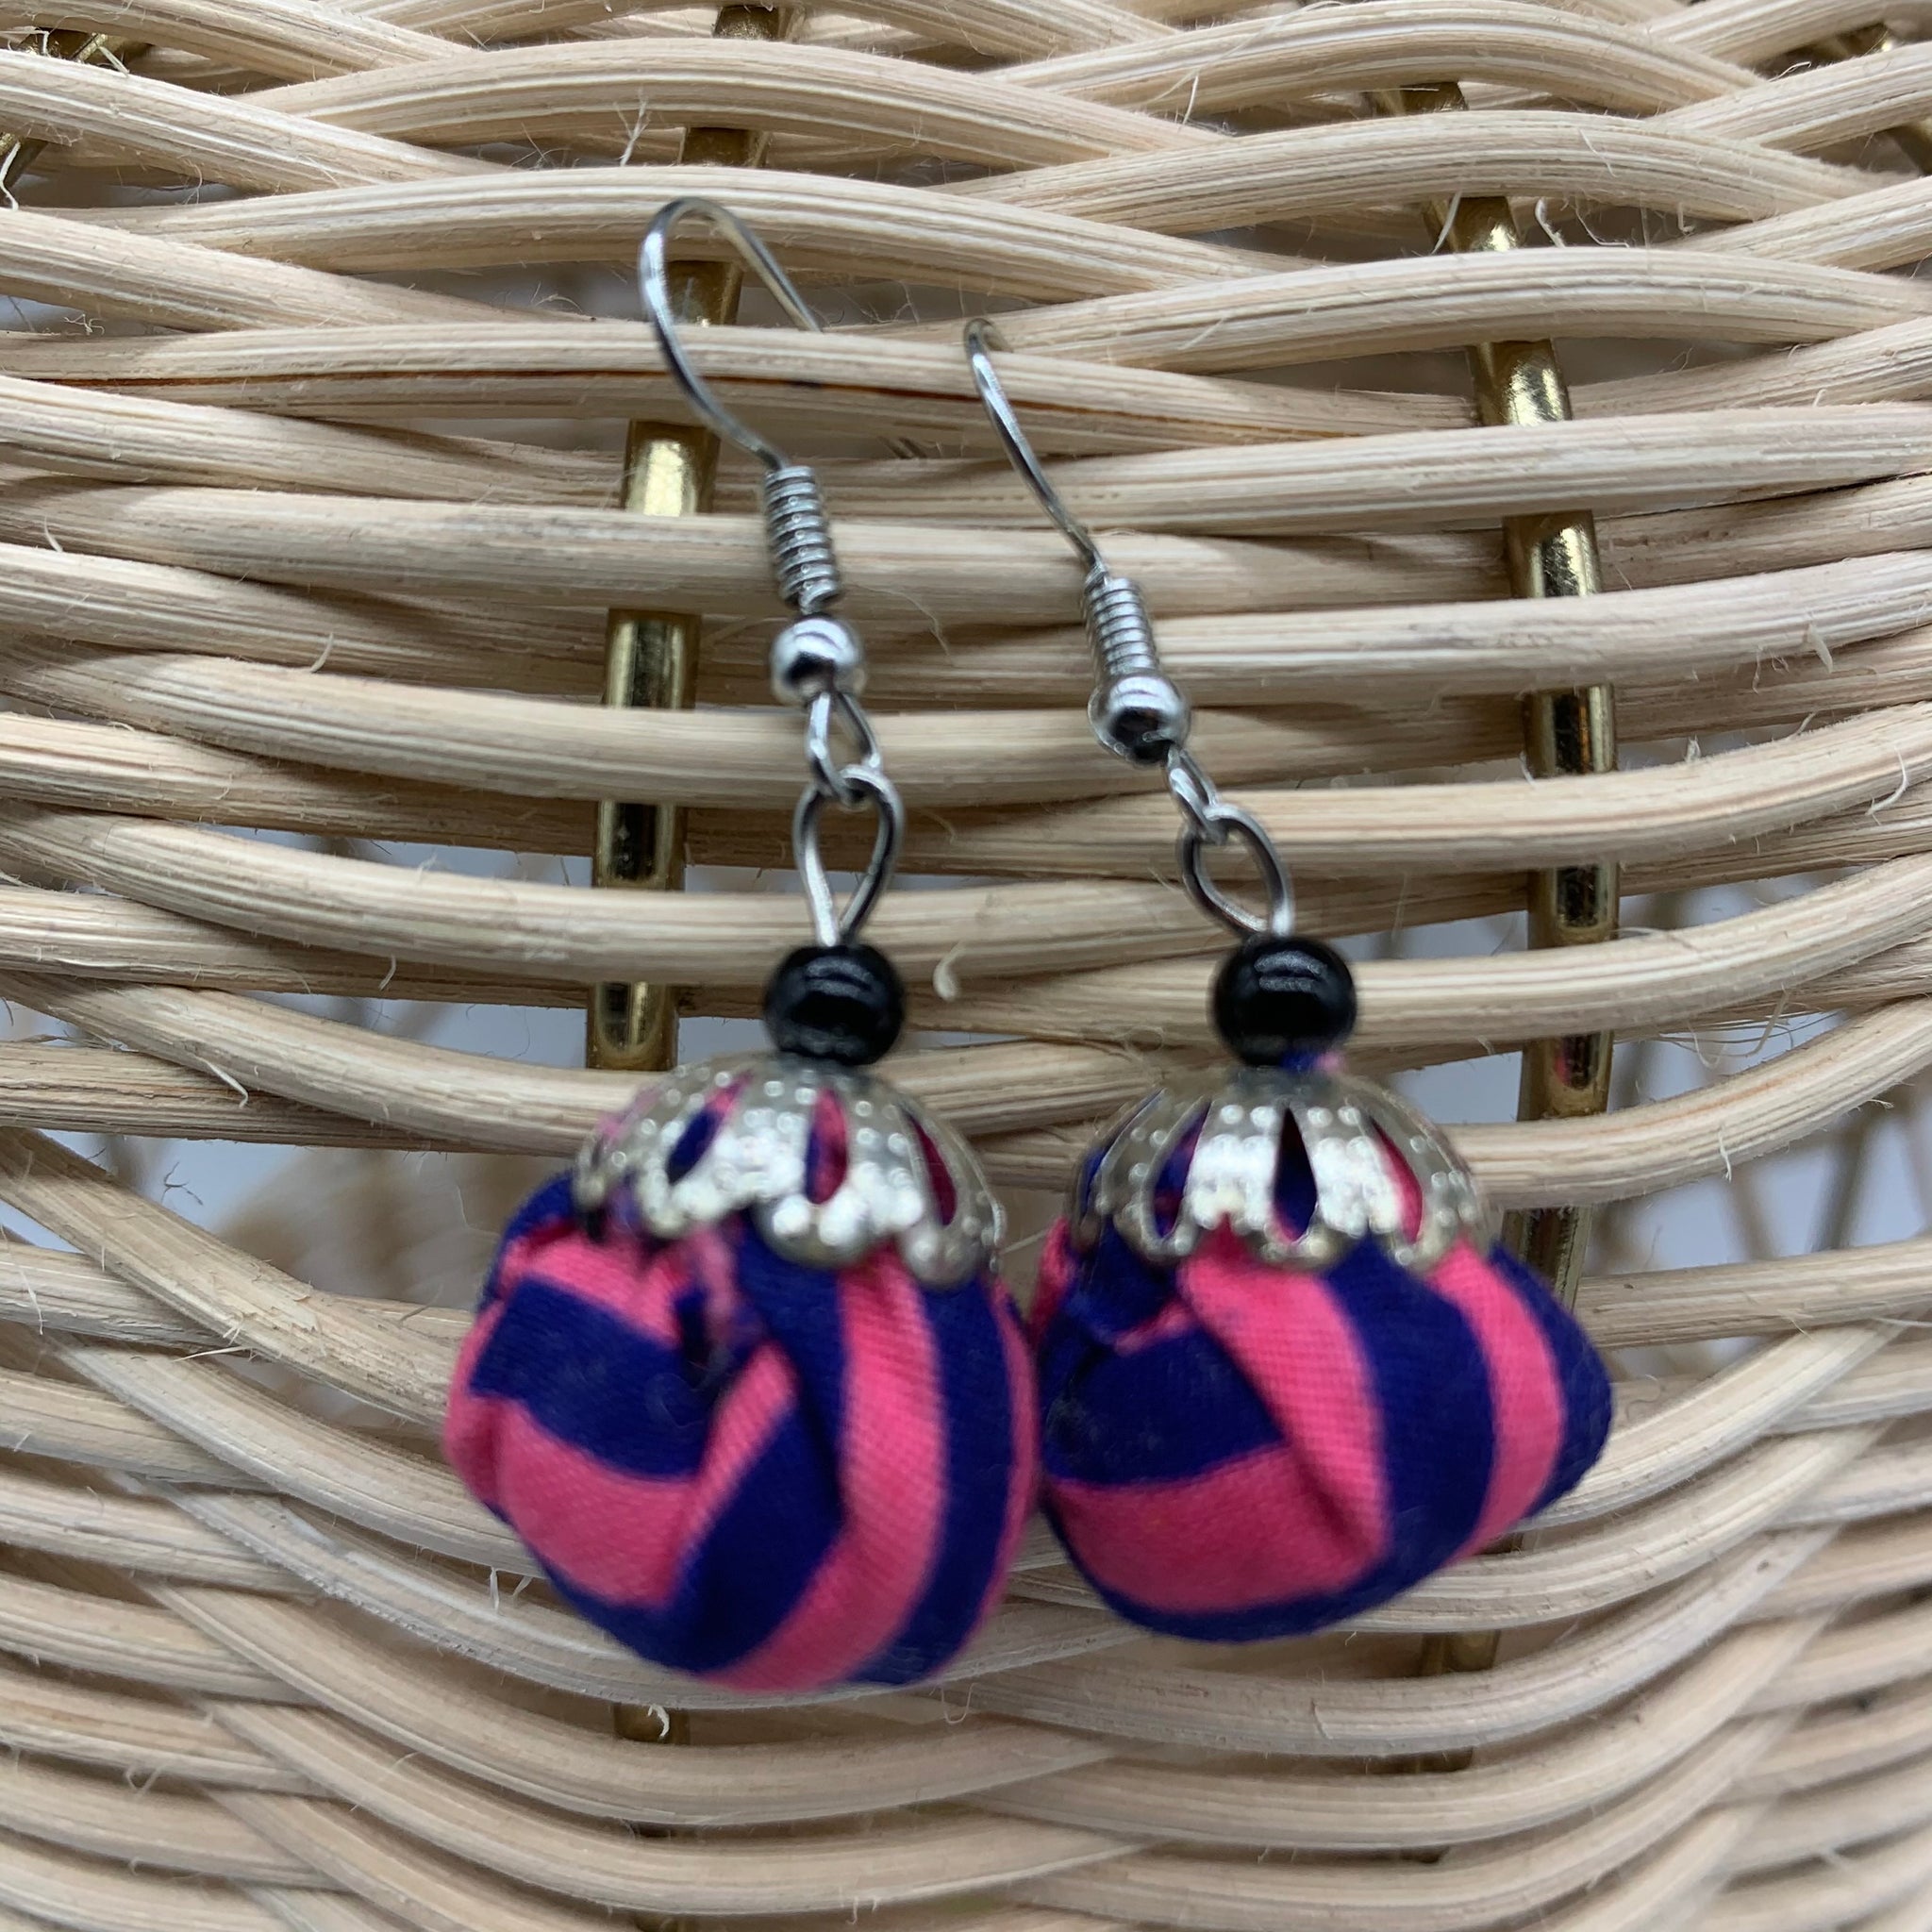 African Print Earrings W/ Beads-Puff Ball Pink Variation 2